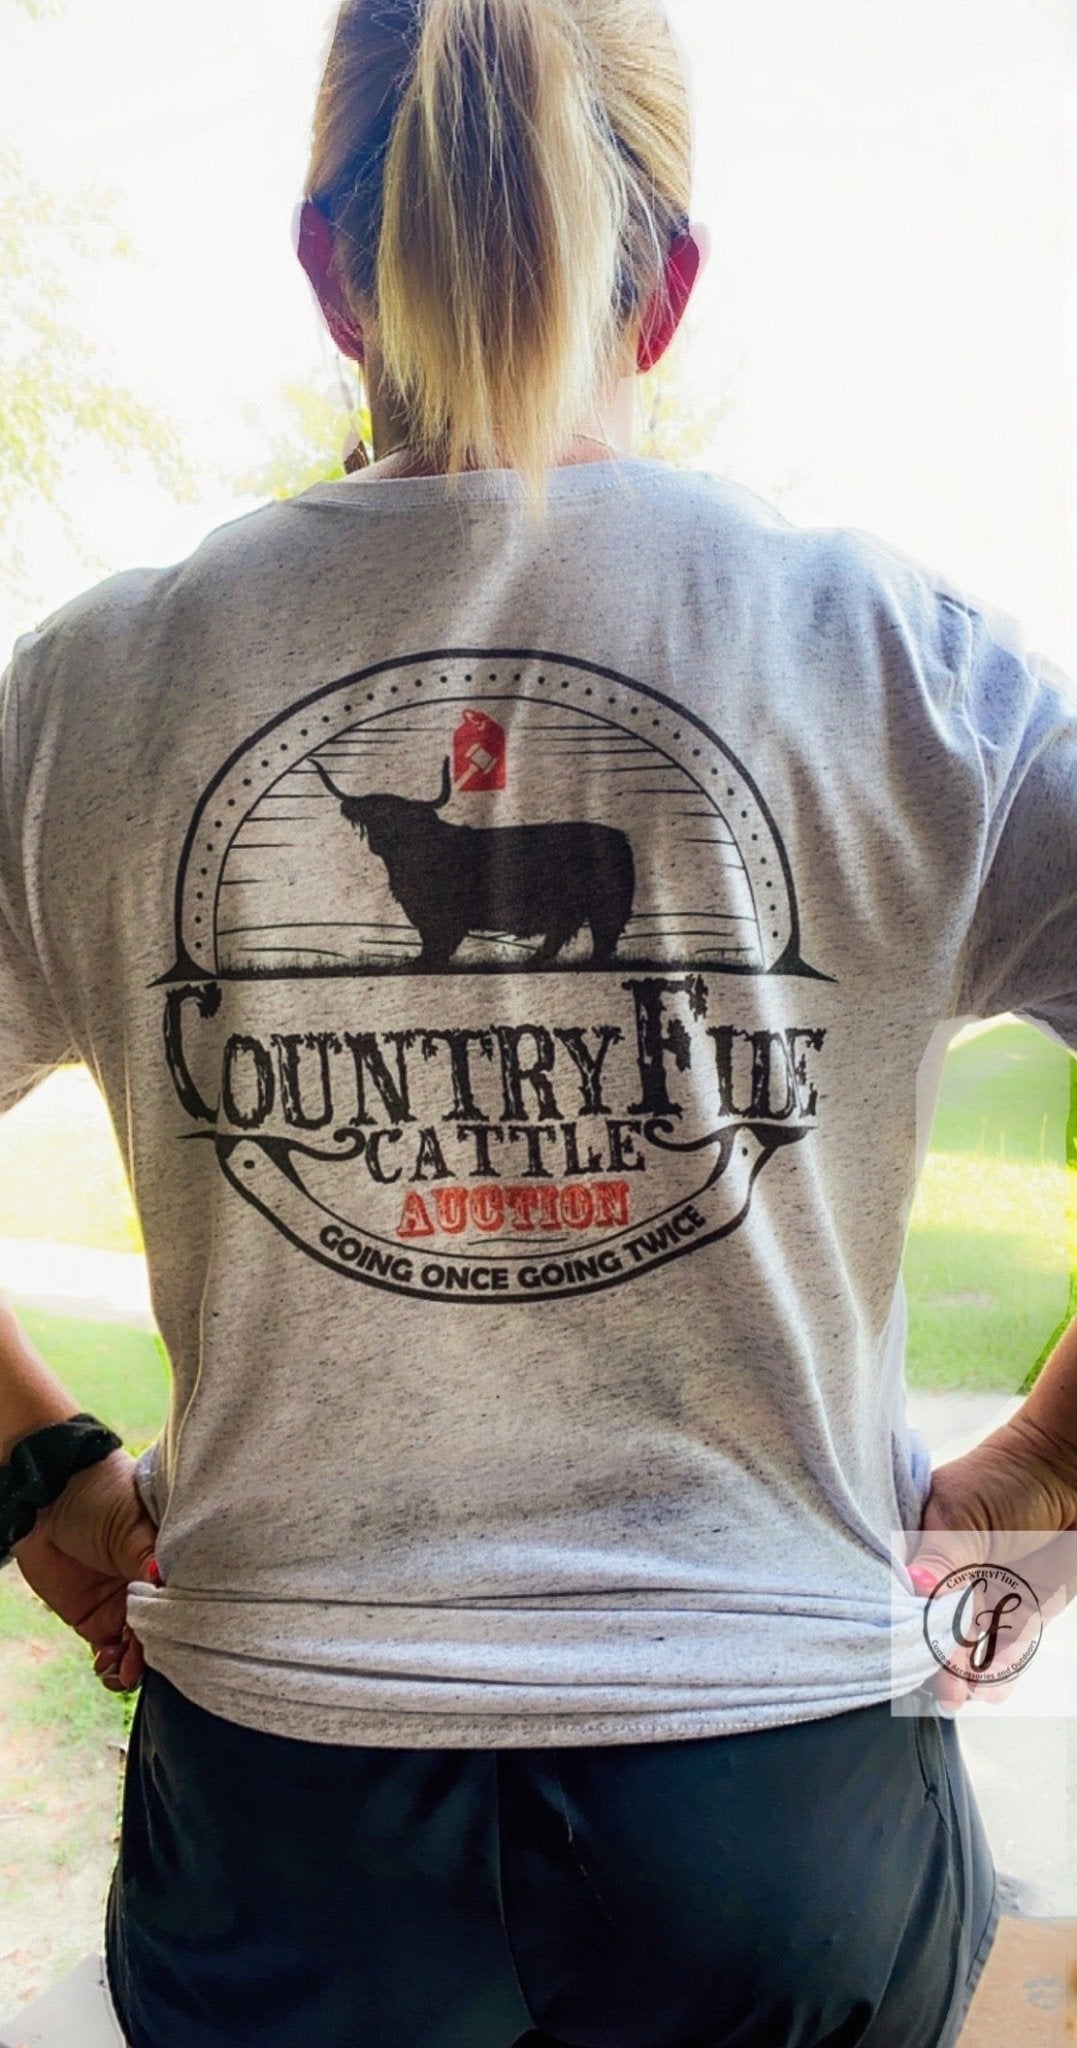 COUNTRYFIDE CATTLE AUCTION - CountryFide Custom Accessories and Outdoors